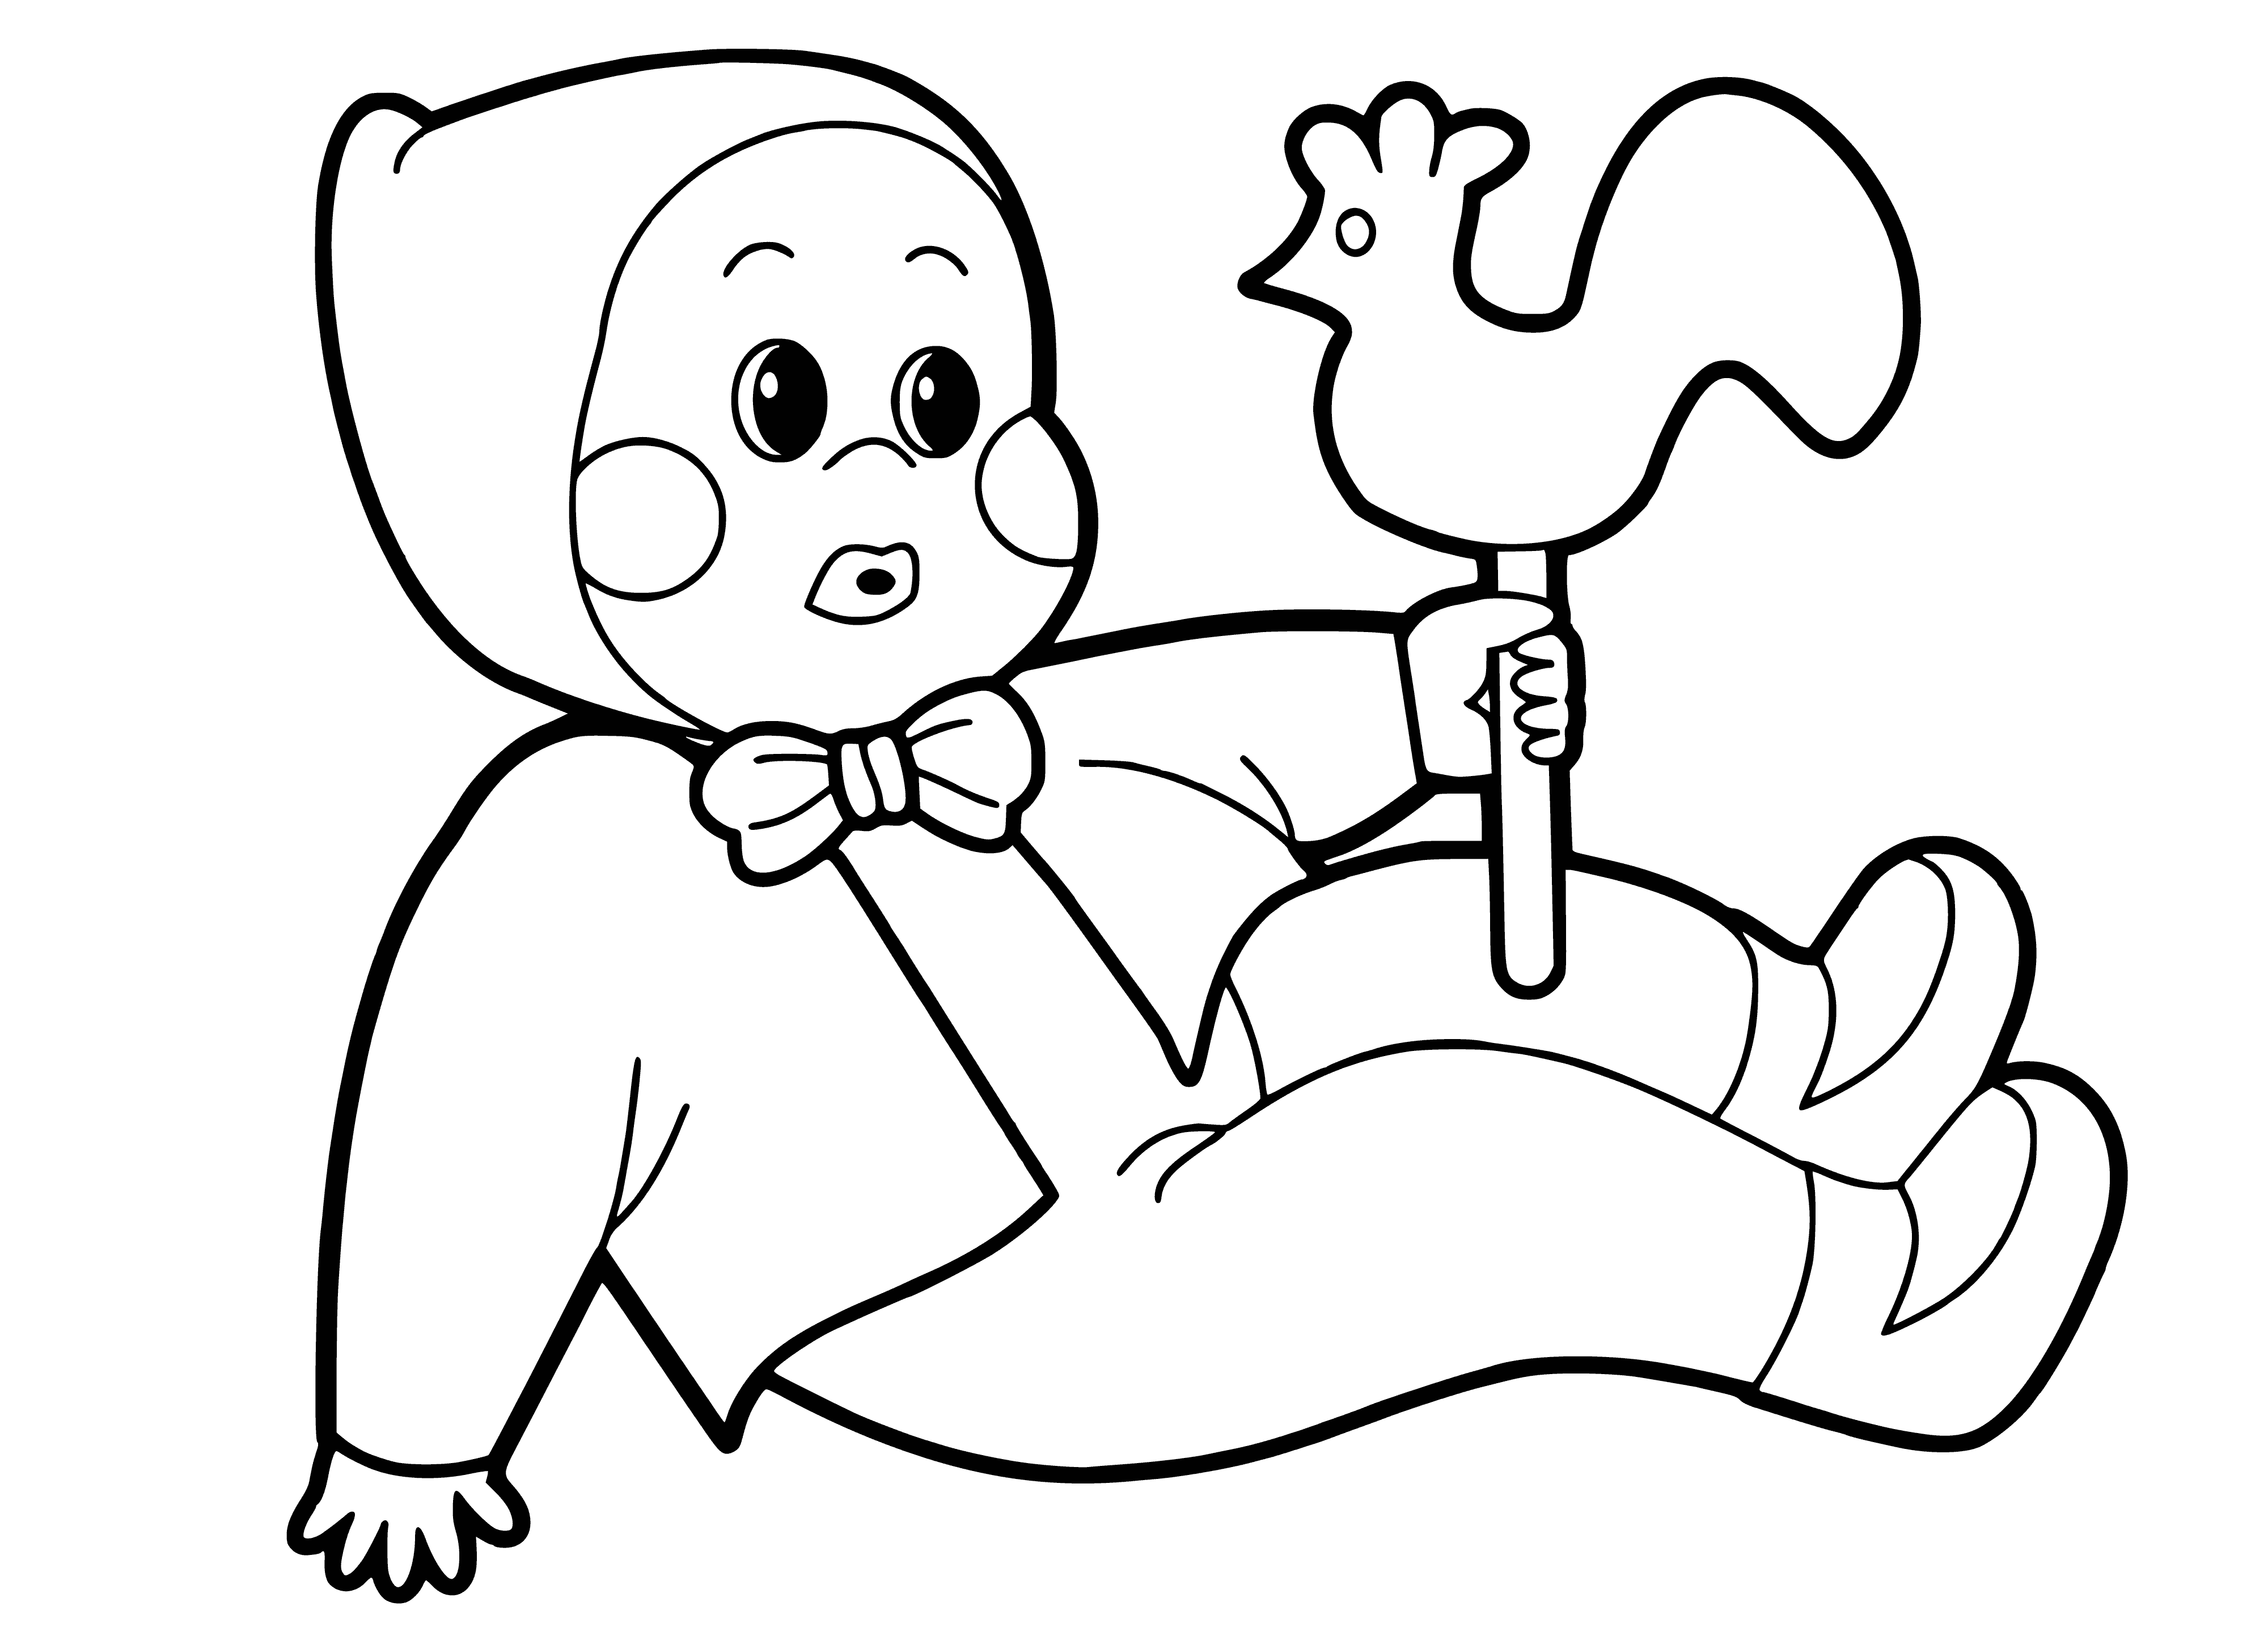 coloring page: Woman feeds baby in high chair while baby plays with toy.